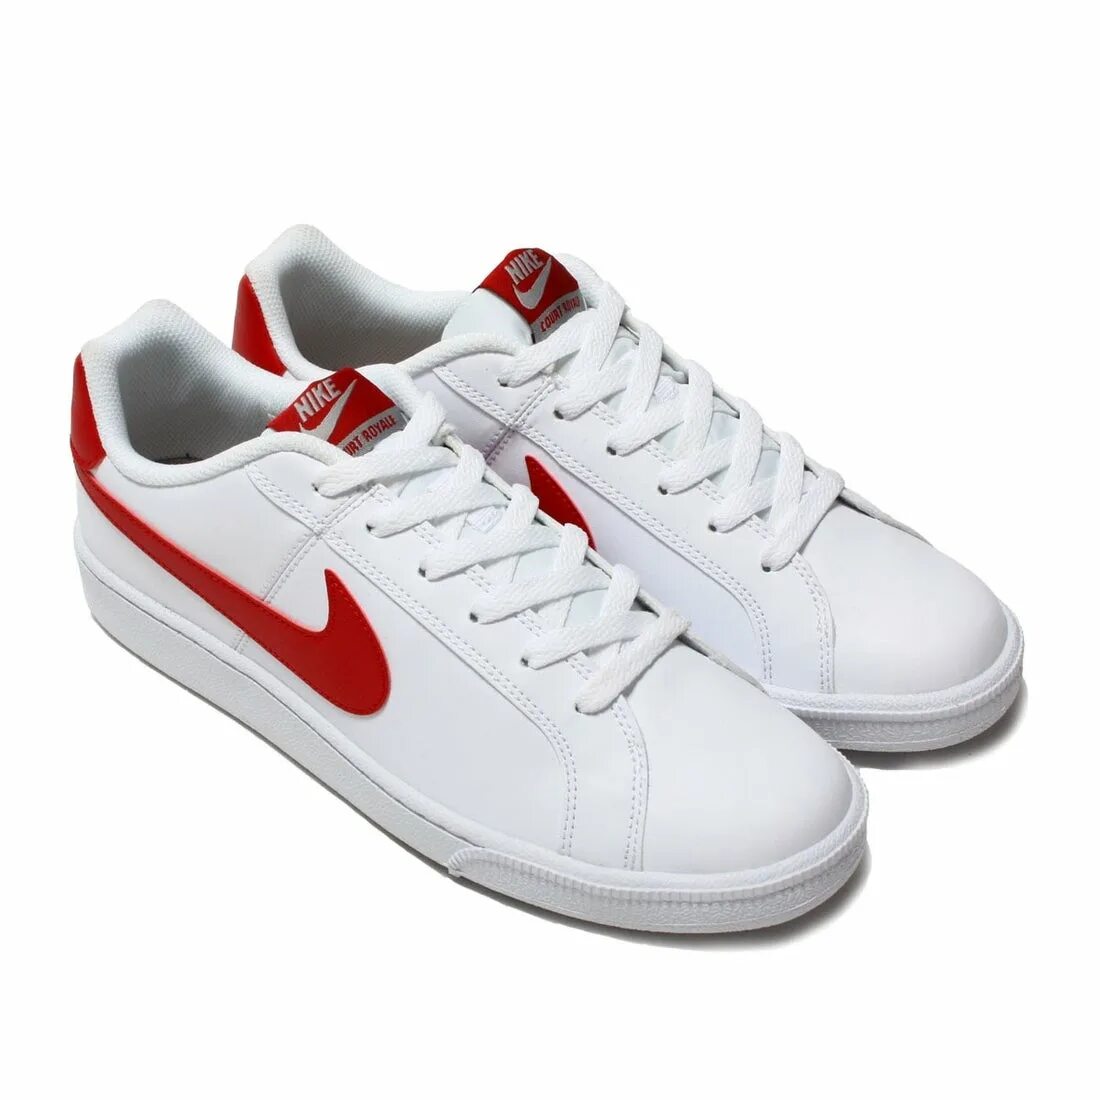 Nike Court Royale White Red. Nike Court Vision White Red. Nike Court Royale красные. Nike Court Royale White.